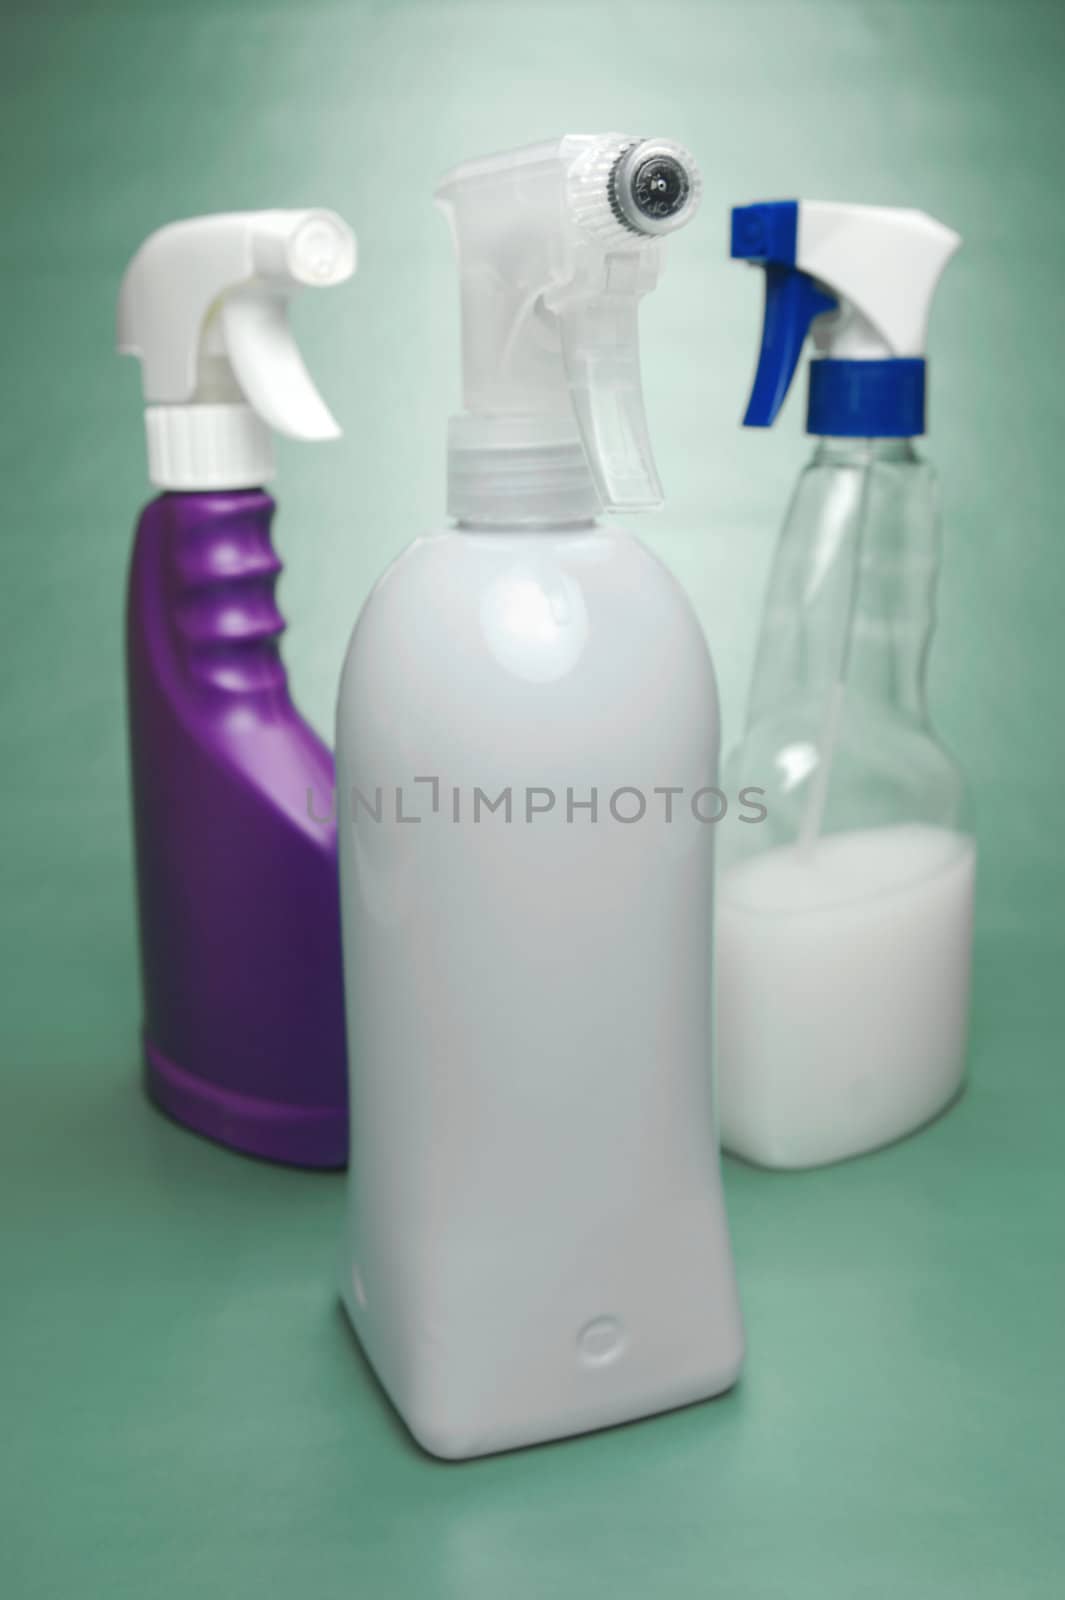 Cleaning Products by Kitch